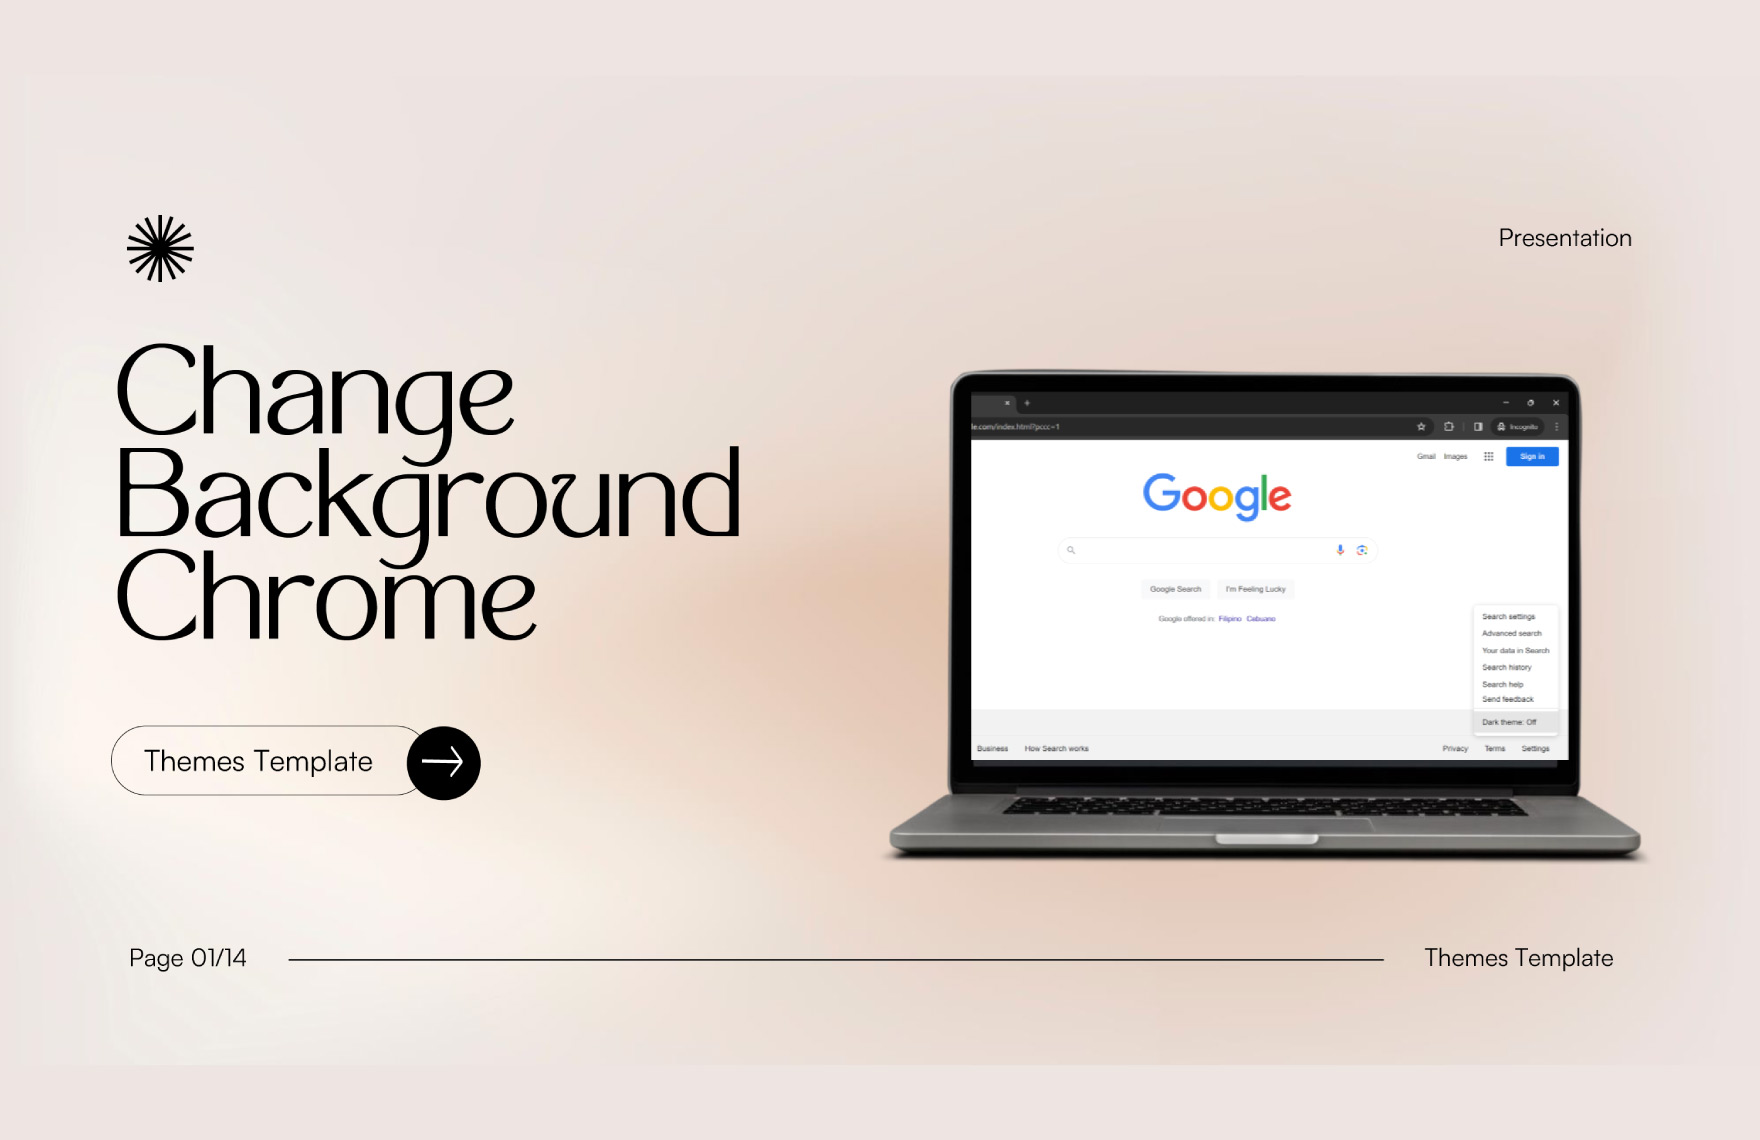 Change Background Chrome Themes Template